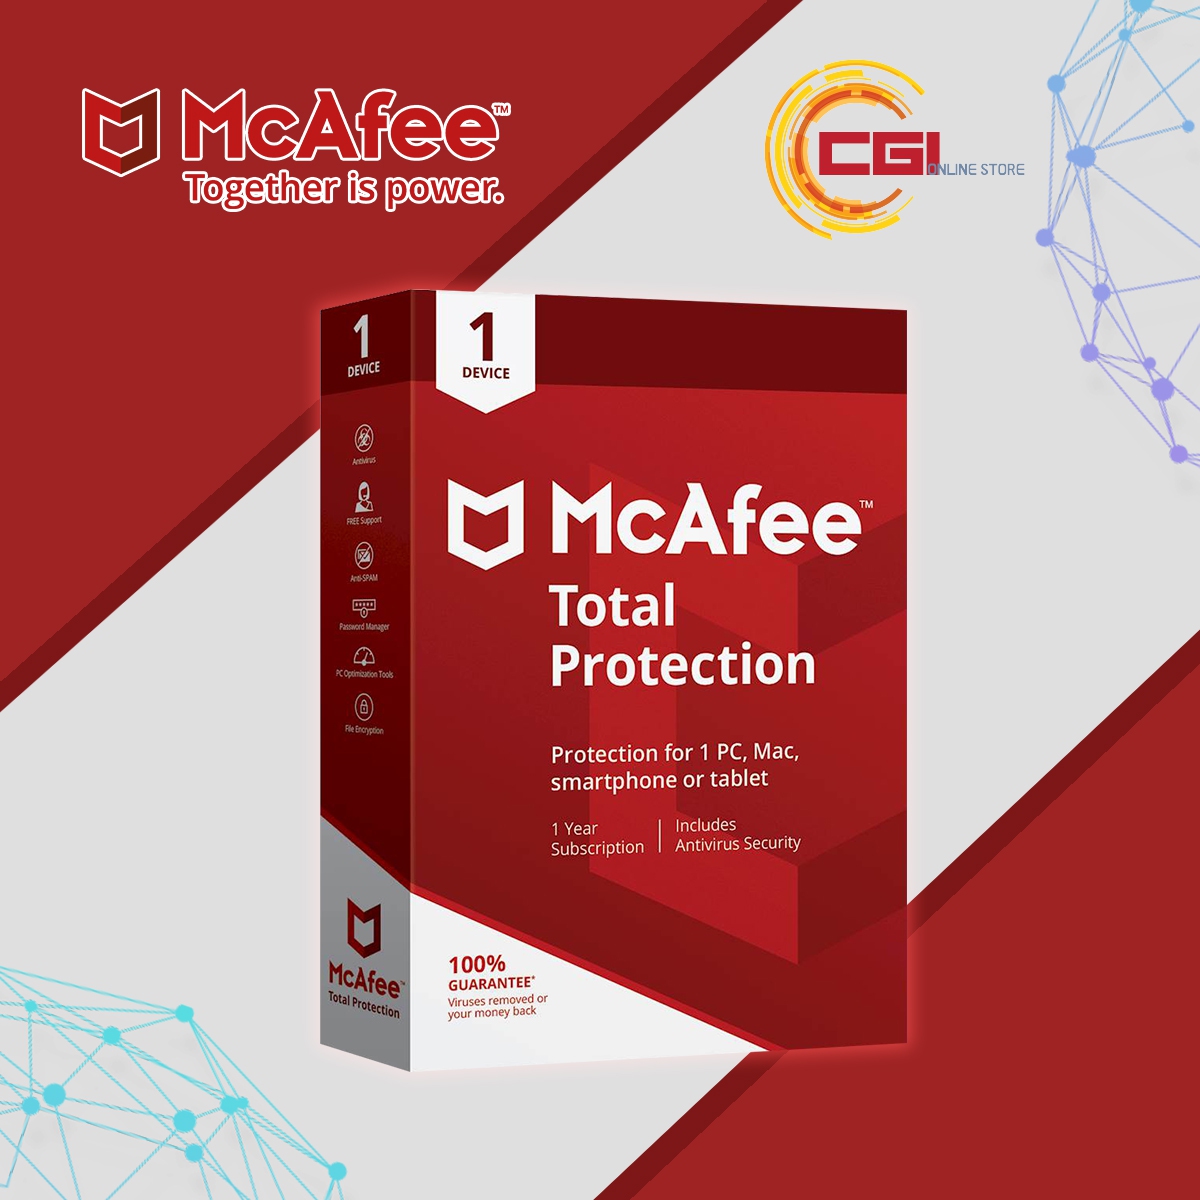 mcafee total protection 2015 torrent